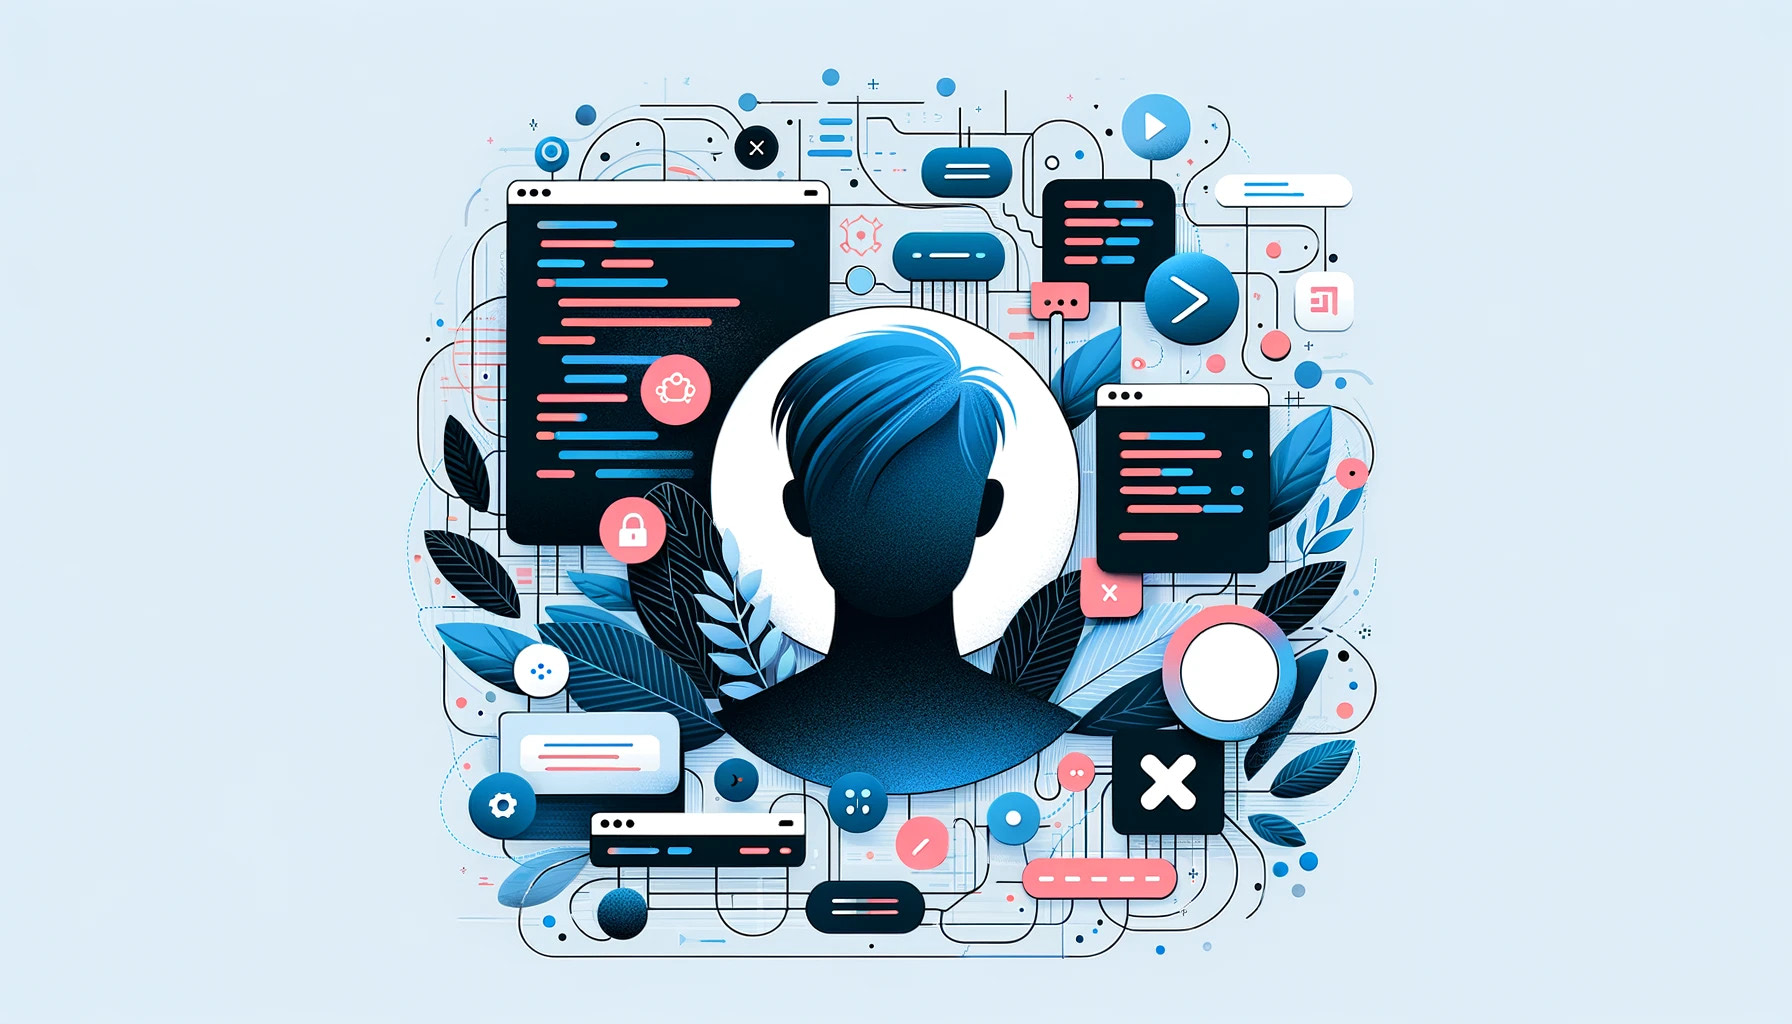 Abstract illustration of a user profile silhouette with web development and customization graphics, representing the personalization of meta titles in a web application.